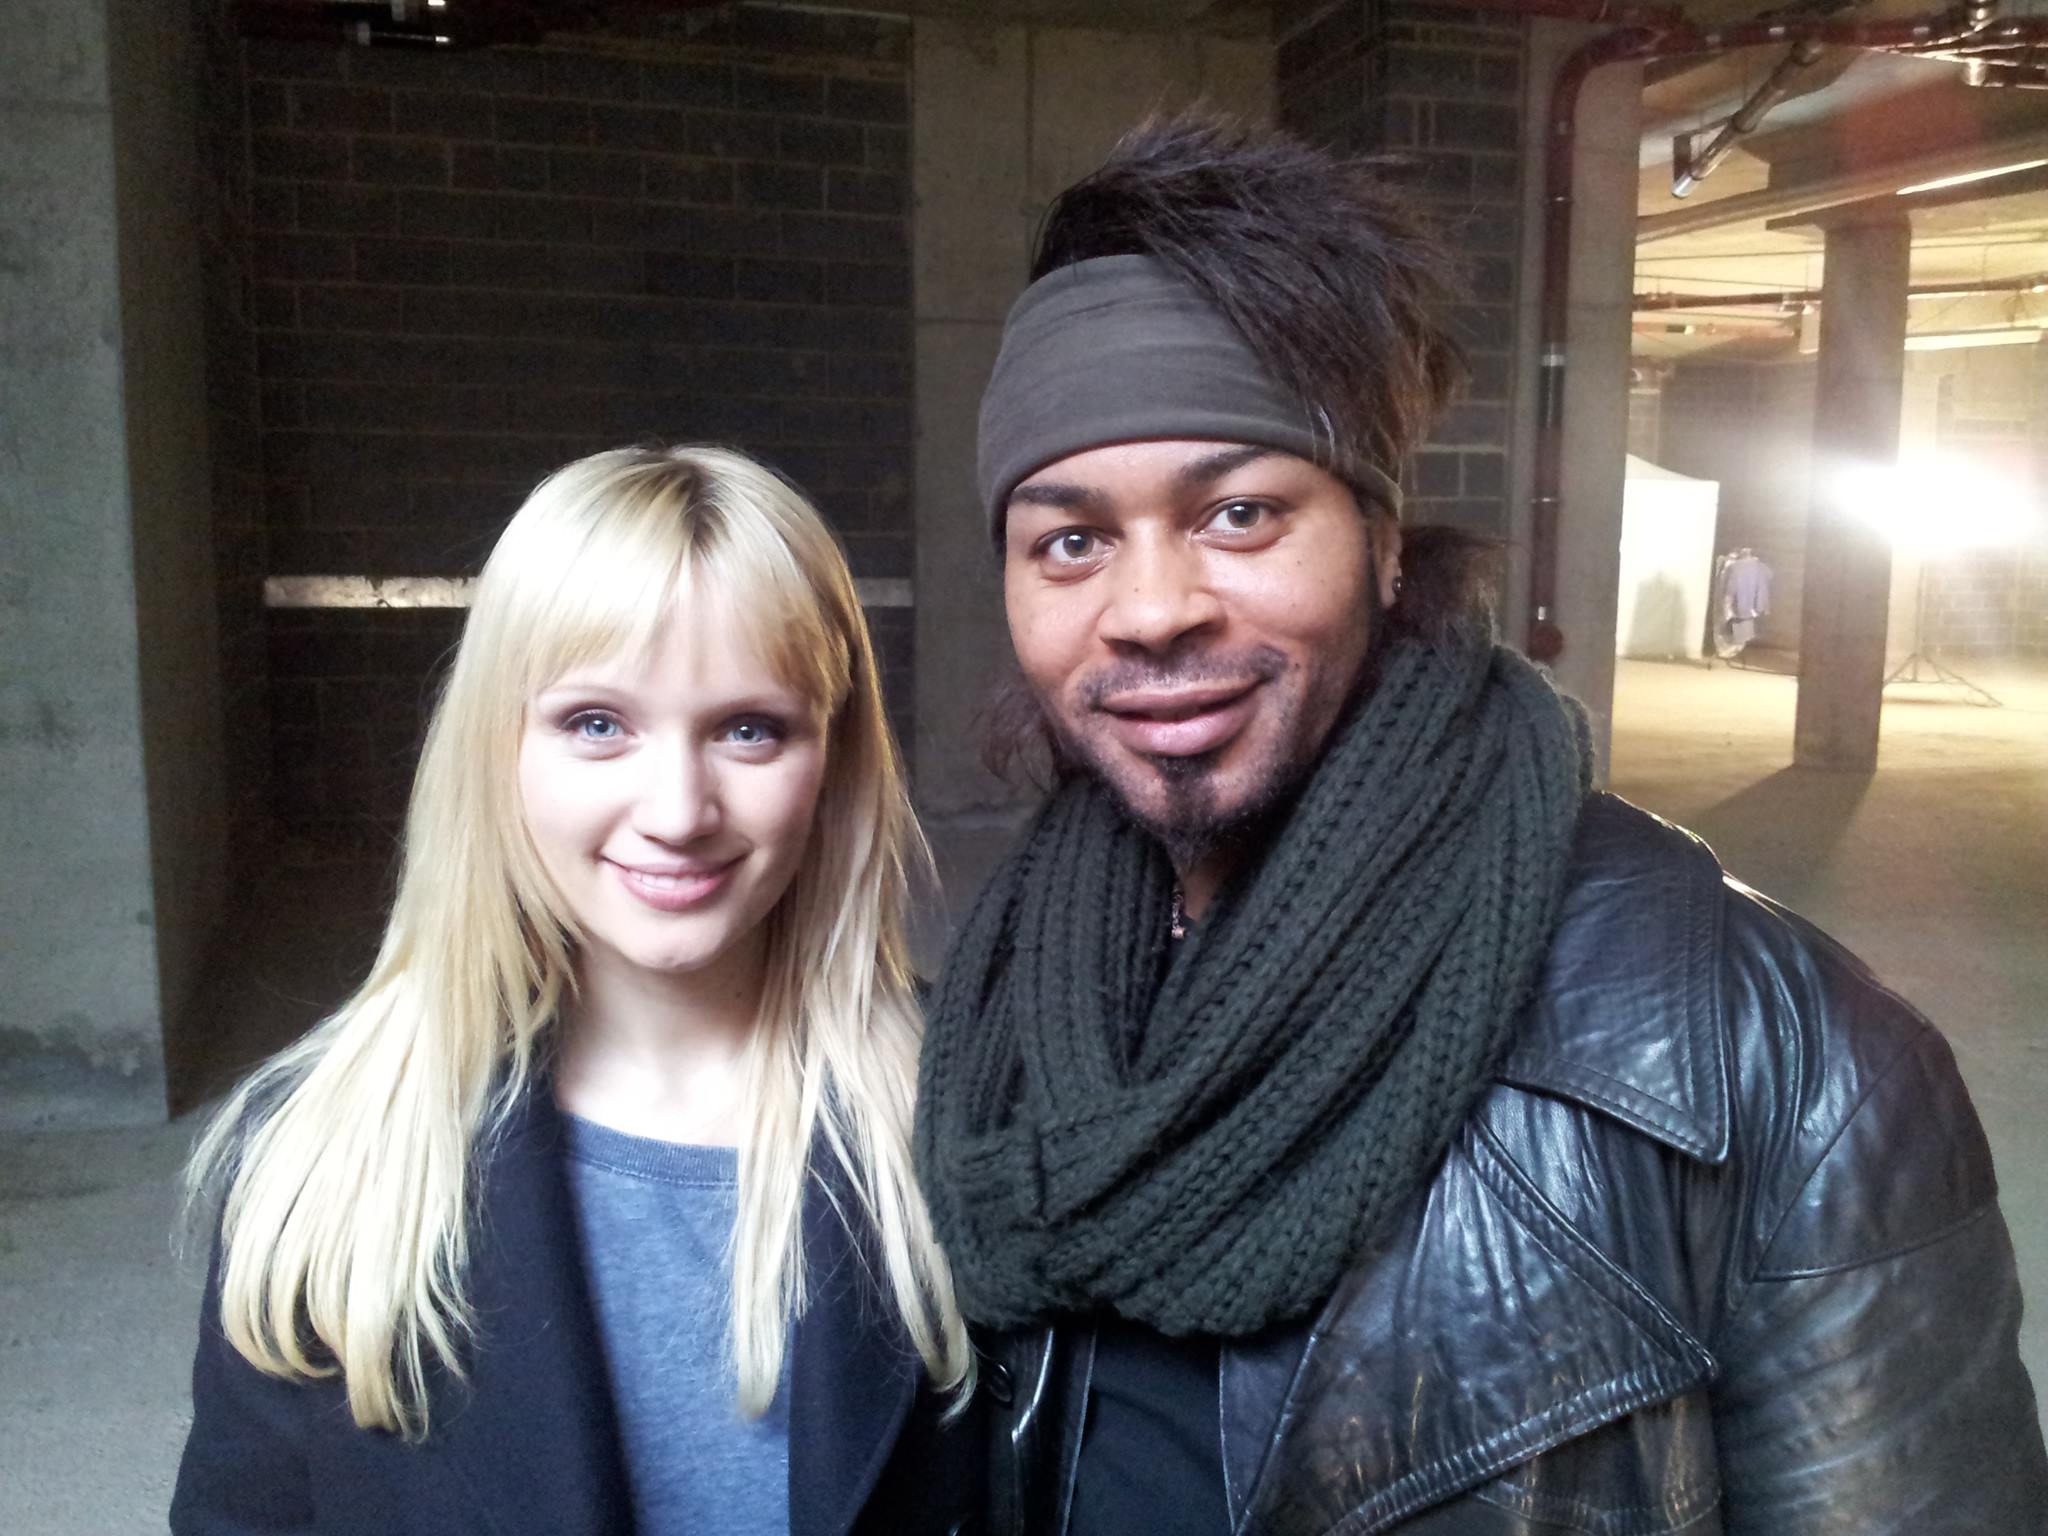 Onset with Actress Emily Berrington on Webseries Human By AMC With William Hurt.